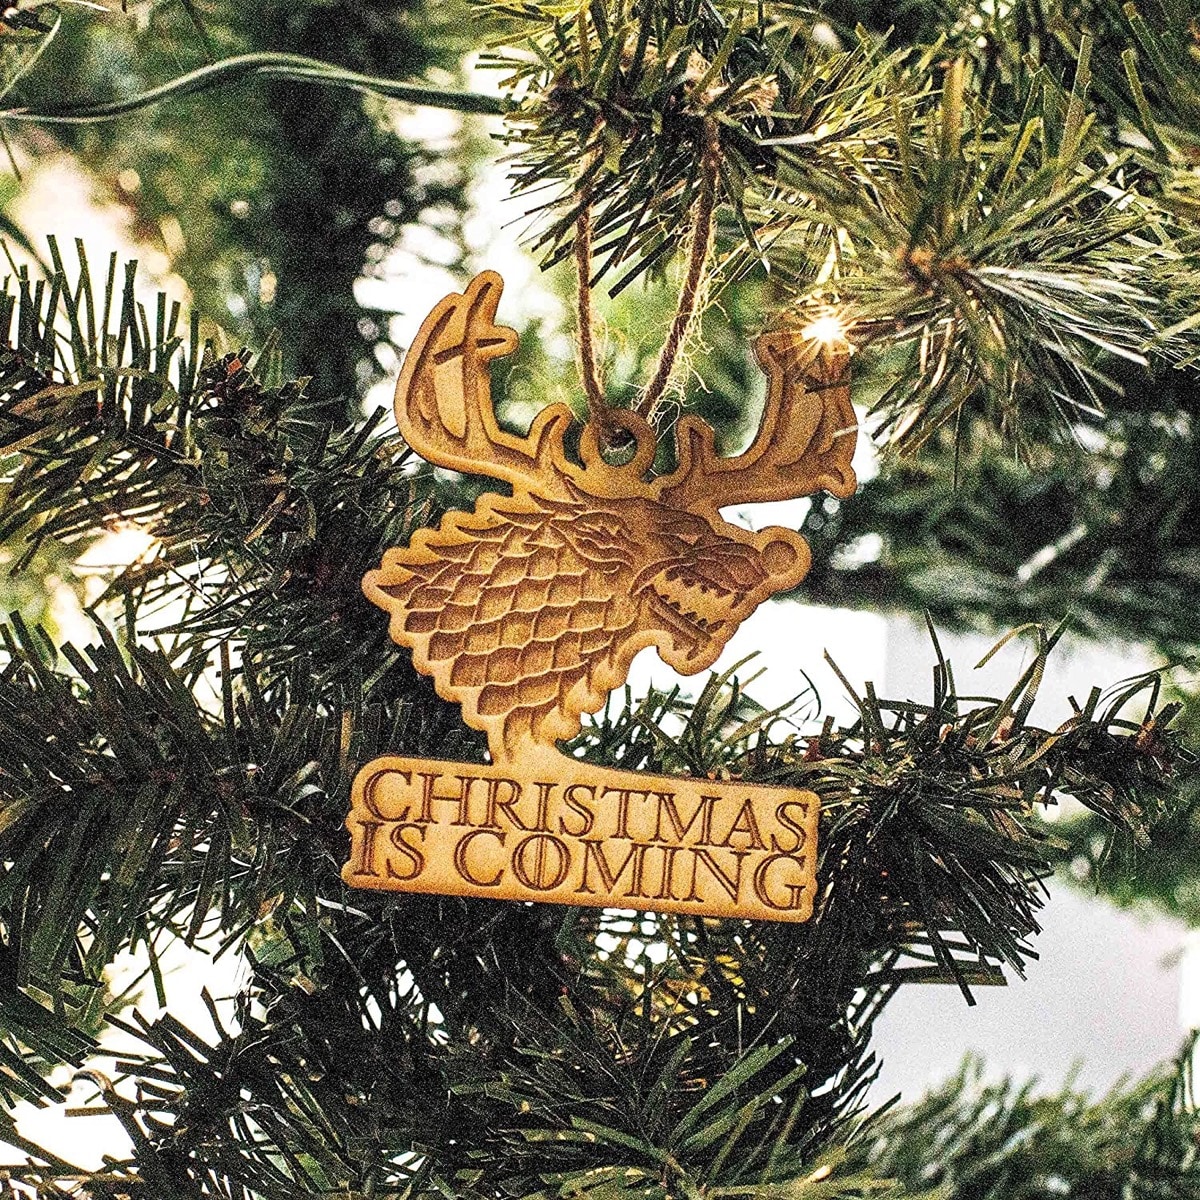 Christmas Is Coming book ornament